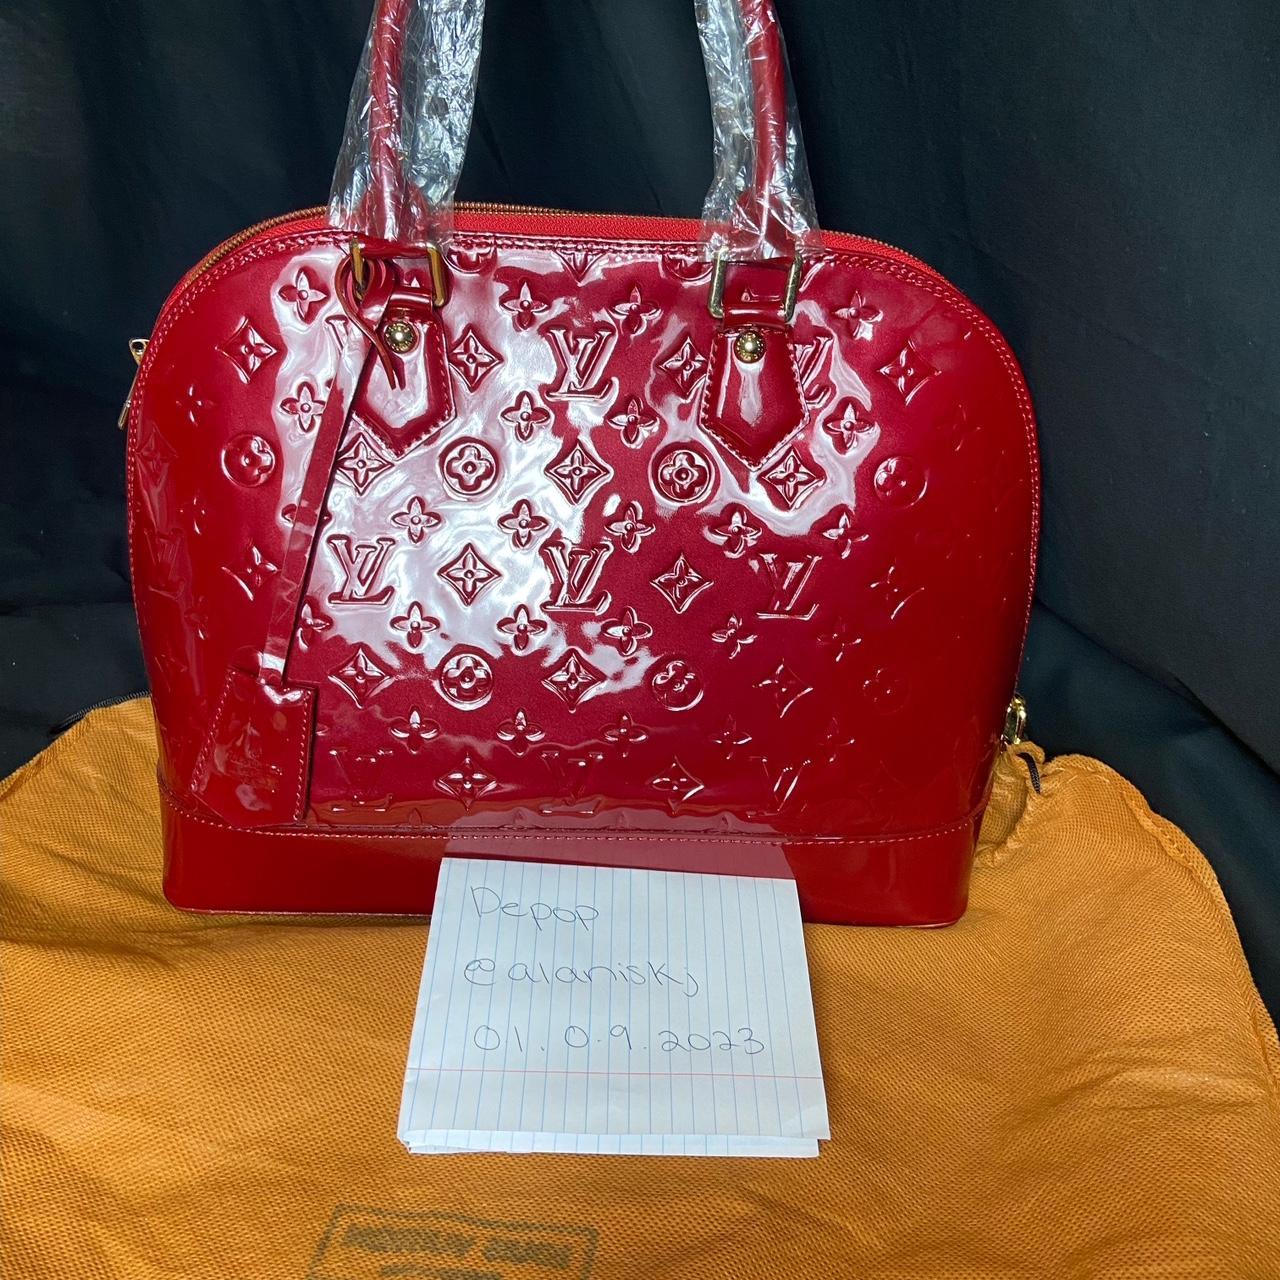 Authentic Louis Vuitton Alma BB bag. Used but in - Depop